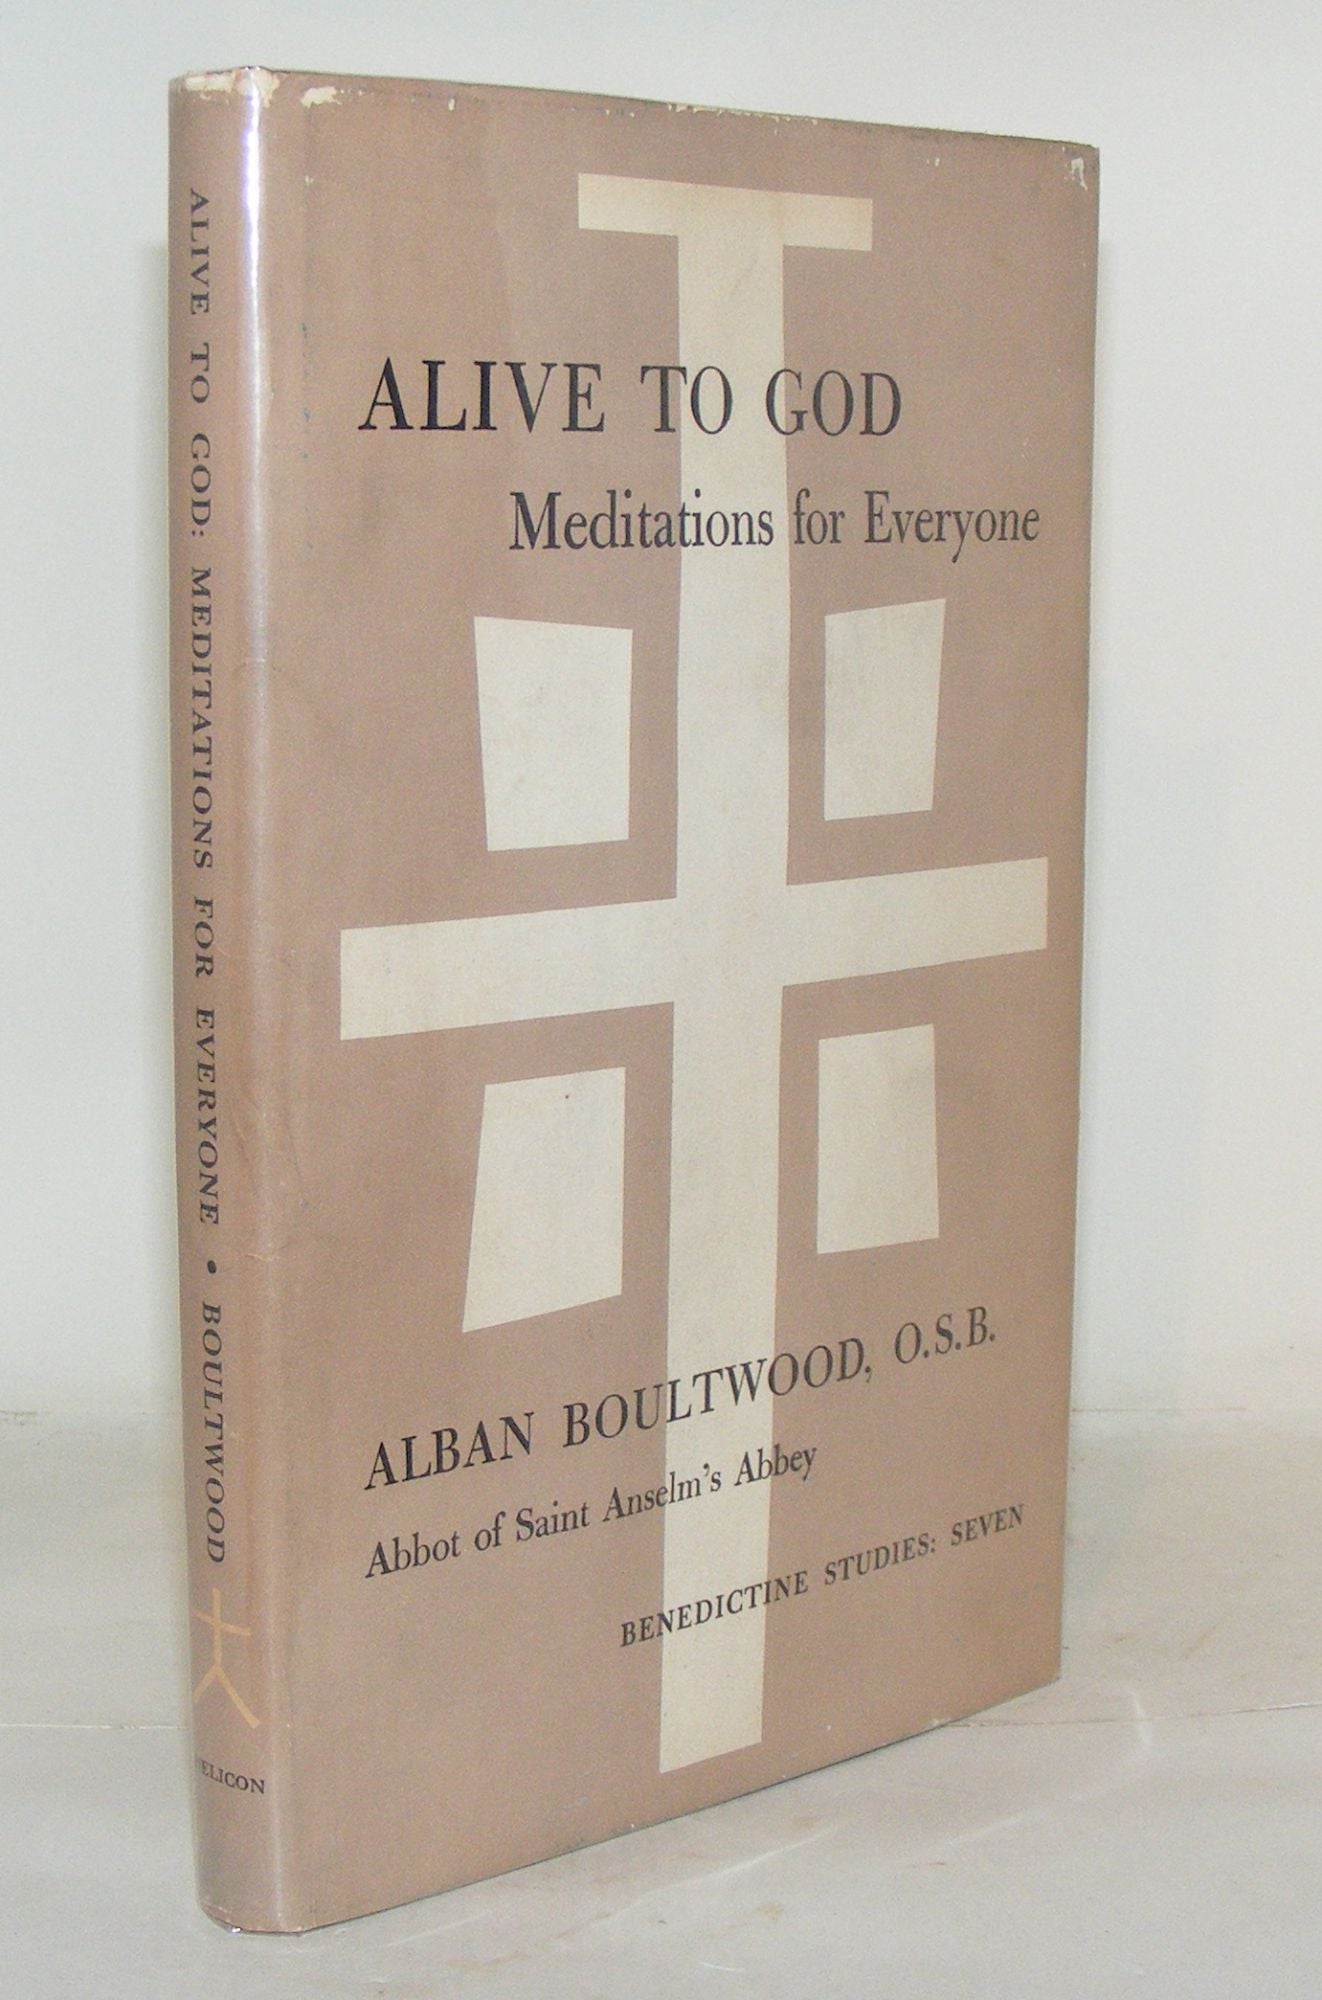 BOULTWOOD Alban - Alive to God Meditations for Everyone